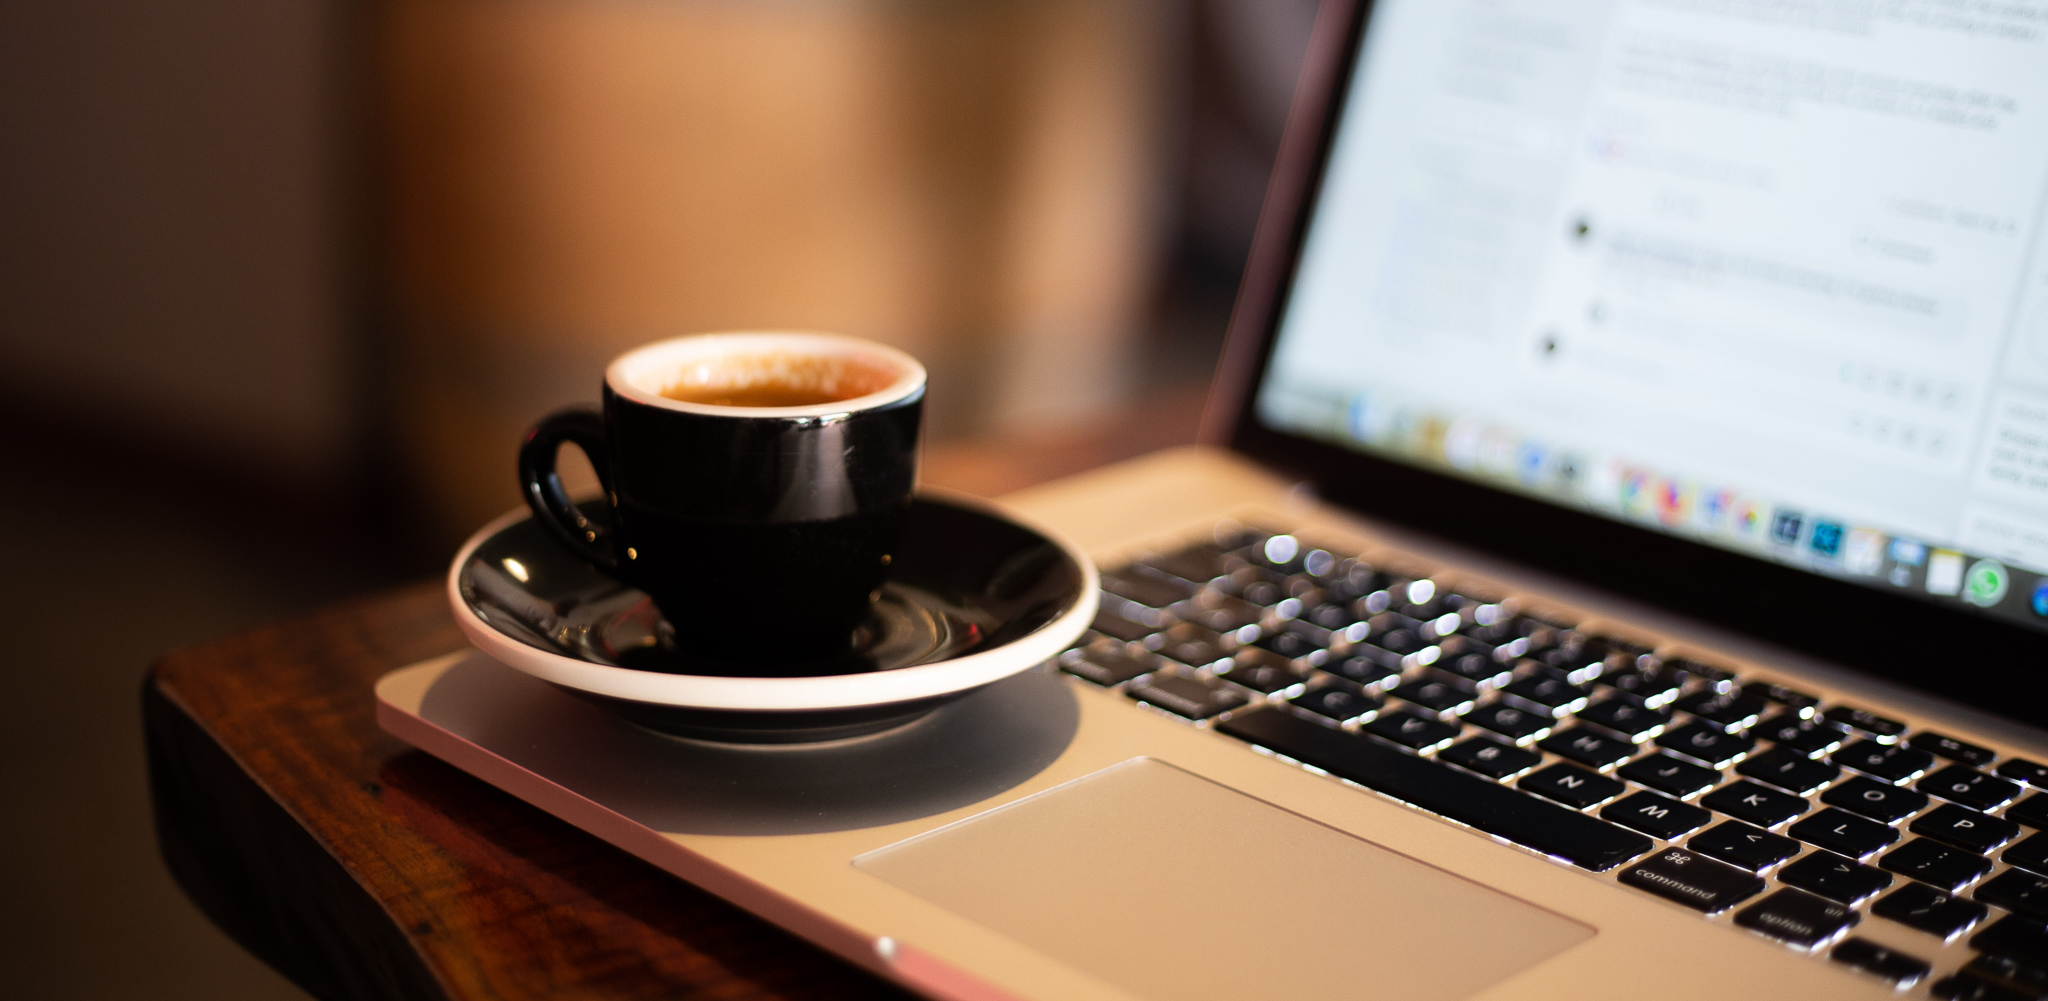 Coffee cup on Laptop